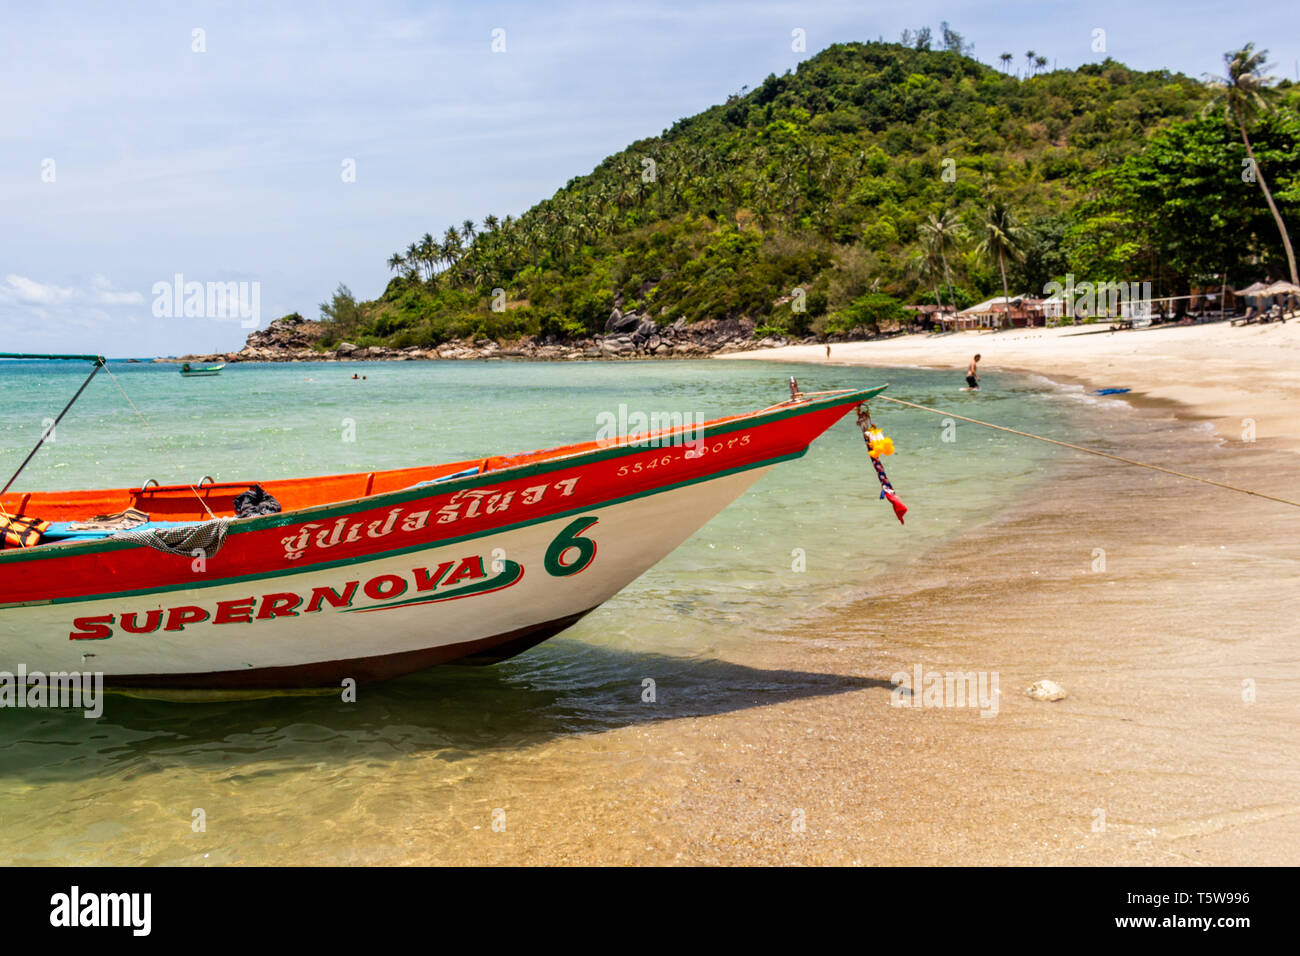 Koh Phangan, Thailand - April 24, 2019: Boat in the crystal clear waters of Bottle Beach on Koh Phangan island Stock Photo